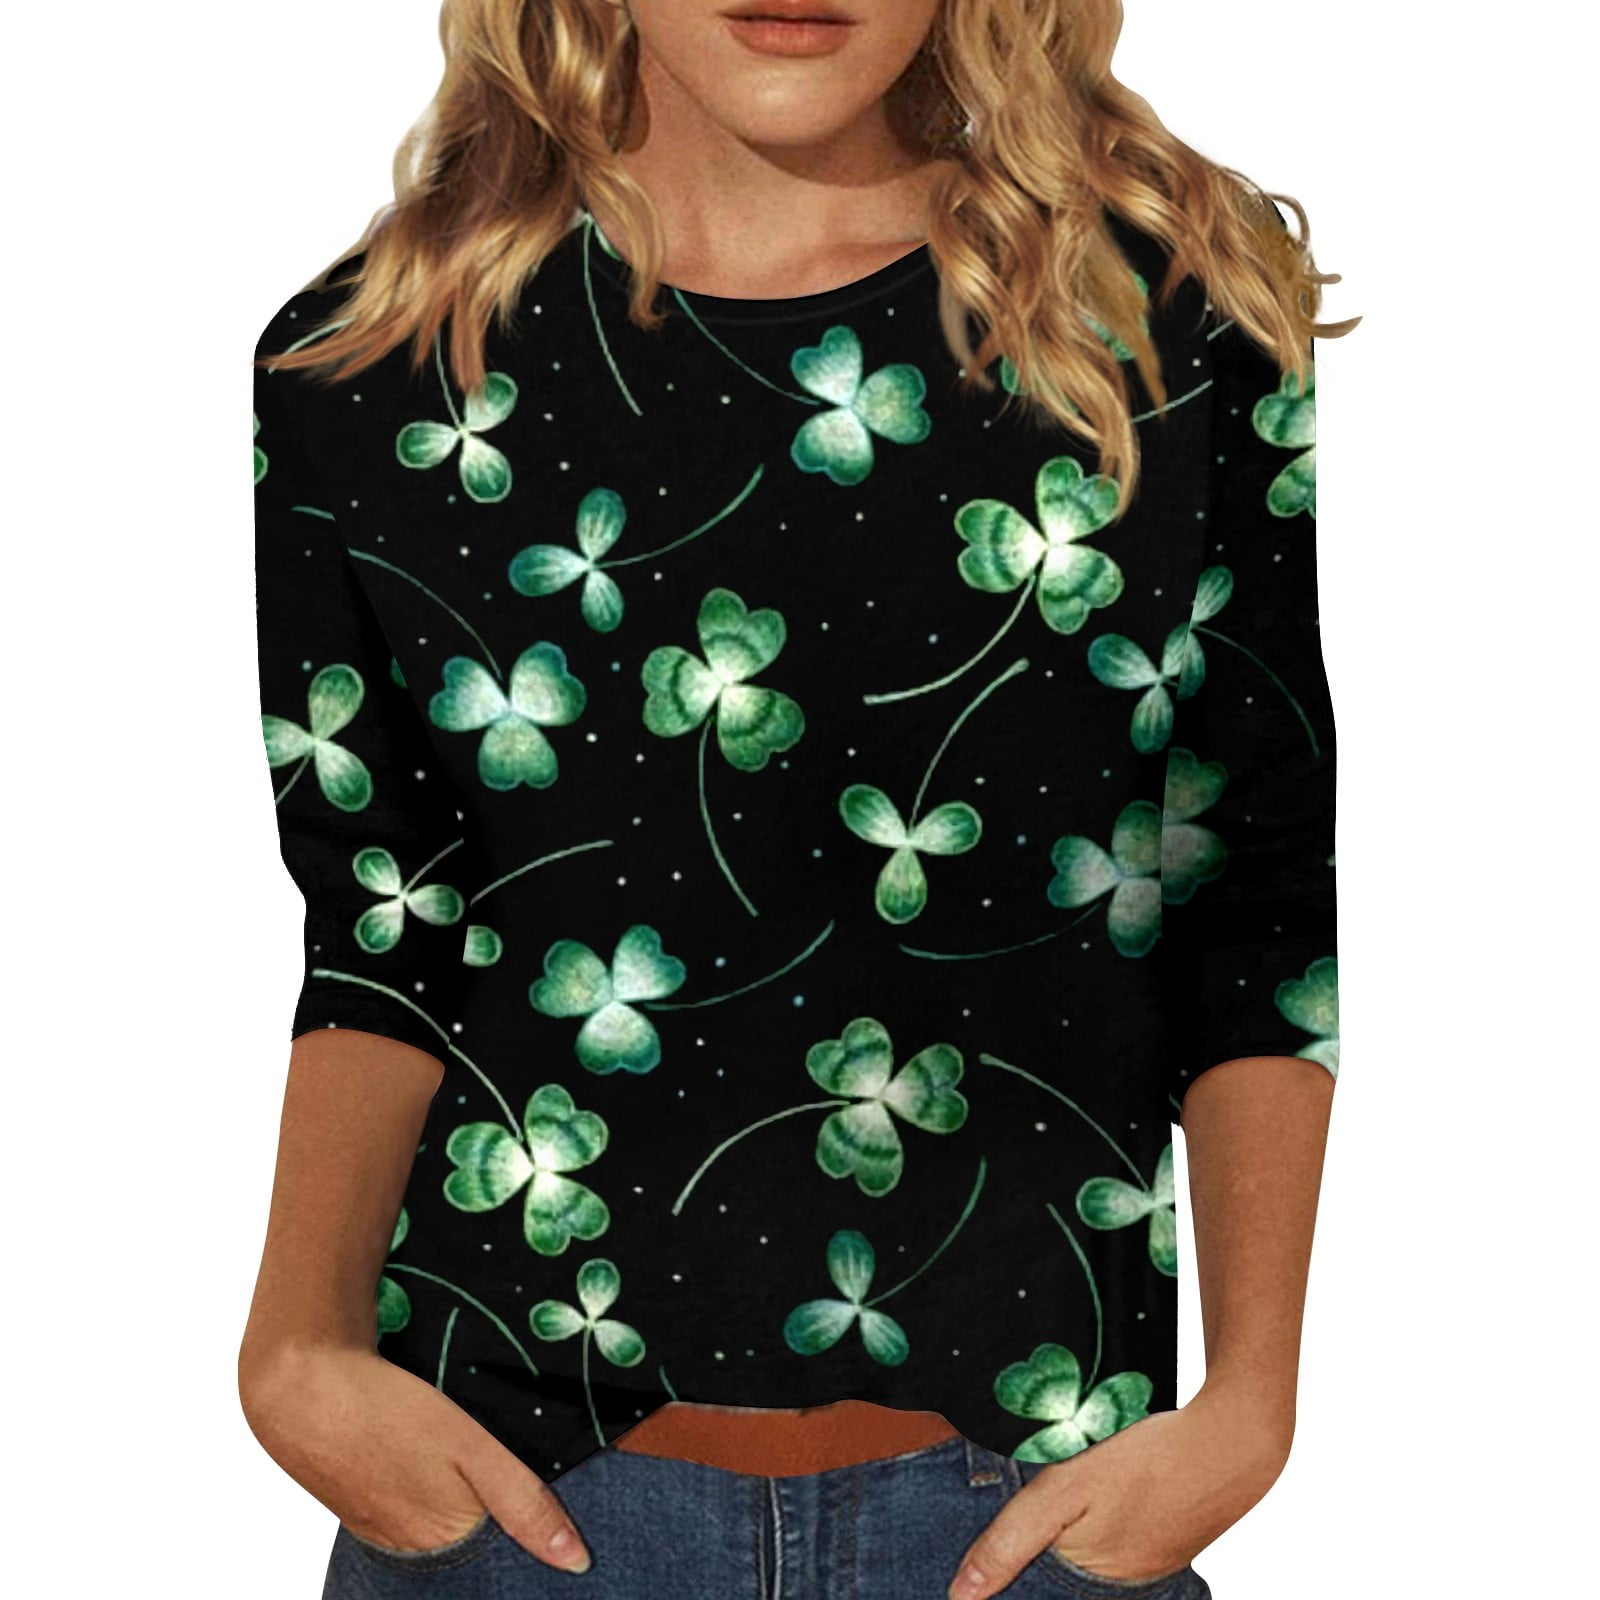 TQWQT St Patricks Day Trendy 3/4 Sleeves Shirts for Womens Casual Round ...